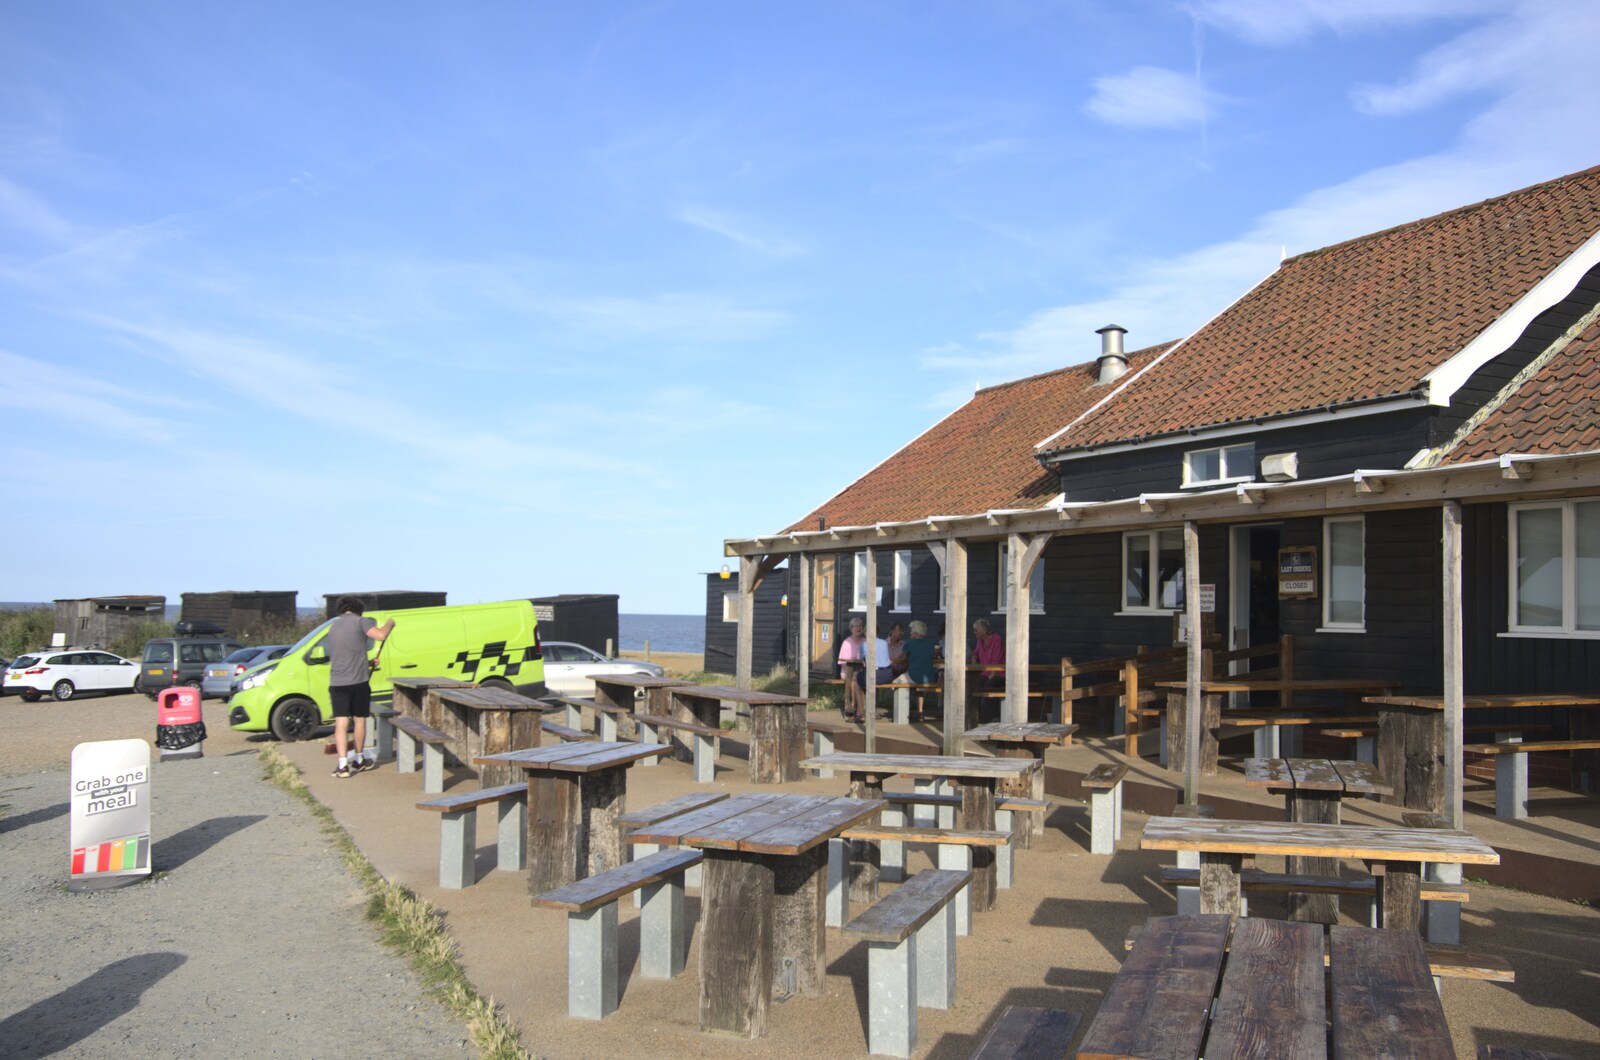 It's closing time at the Dunwich café from A Cambridge Reunion on the Beach, Dunwich, Suffolk - 23rd August 2023